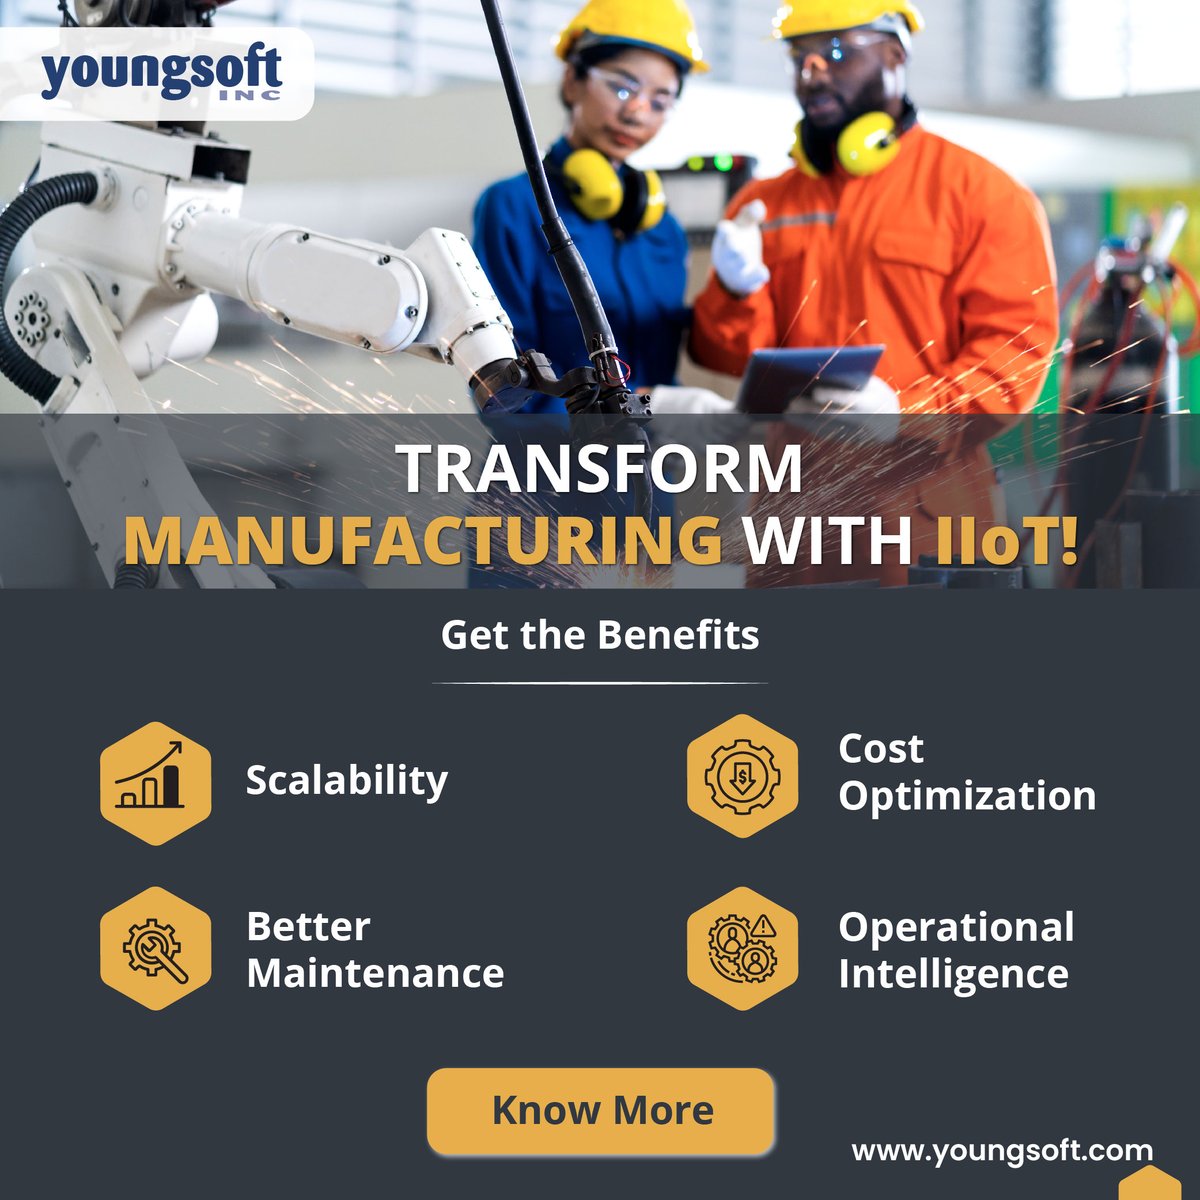 Equip your manufacturing plant with #IIoT technology and receive 360-degree operational benefits like scalability, cost optimization, better maintenance, and operational intelligence.

Know More: youngsoft.com/services/strat…
 
#iiot #industry4point0 #manufacturingindustry